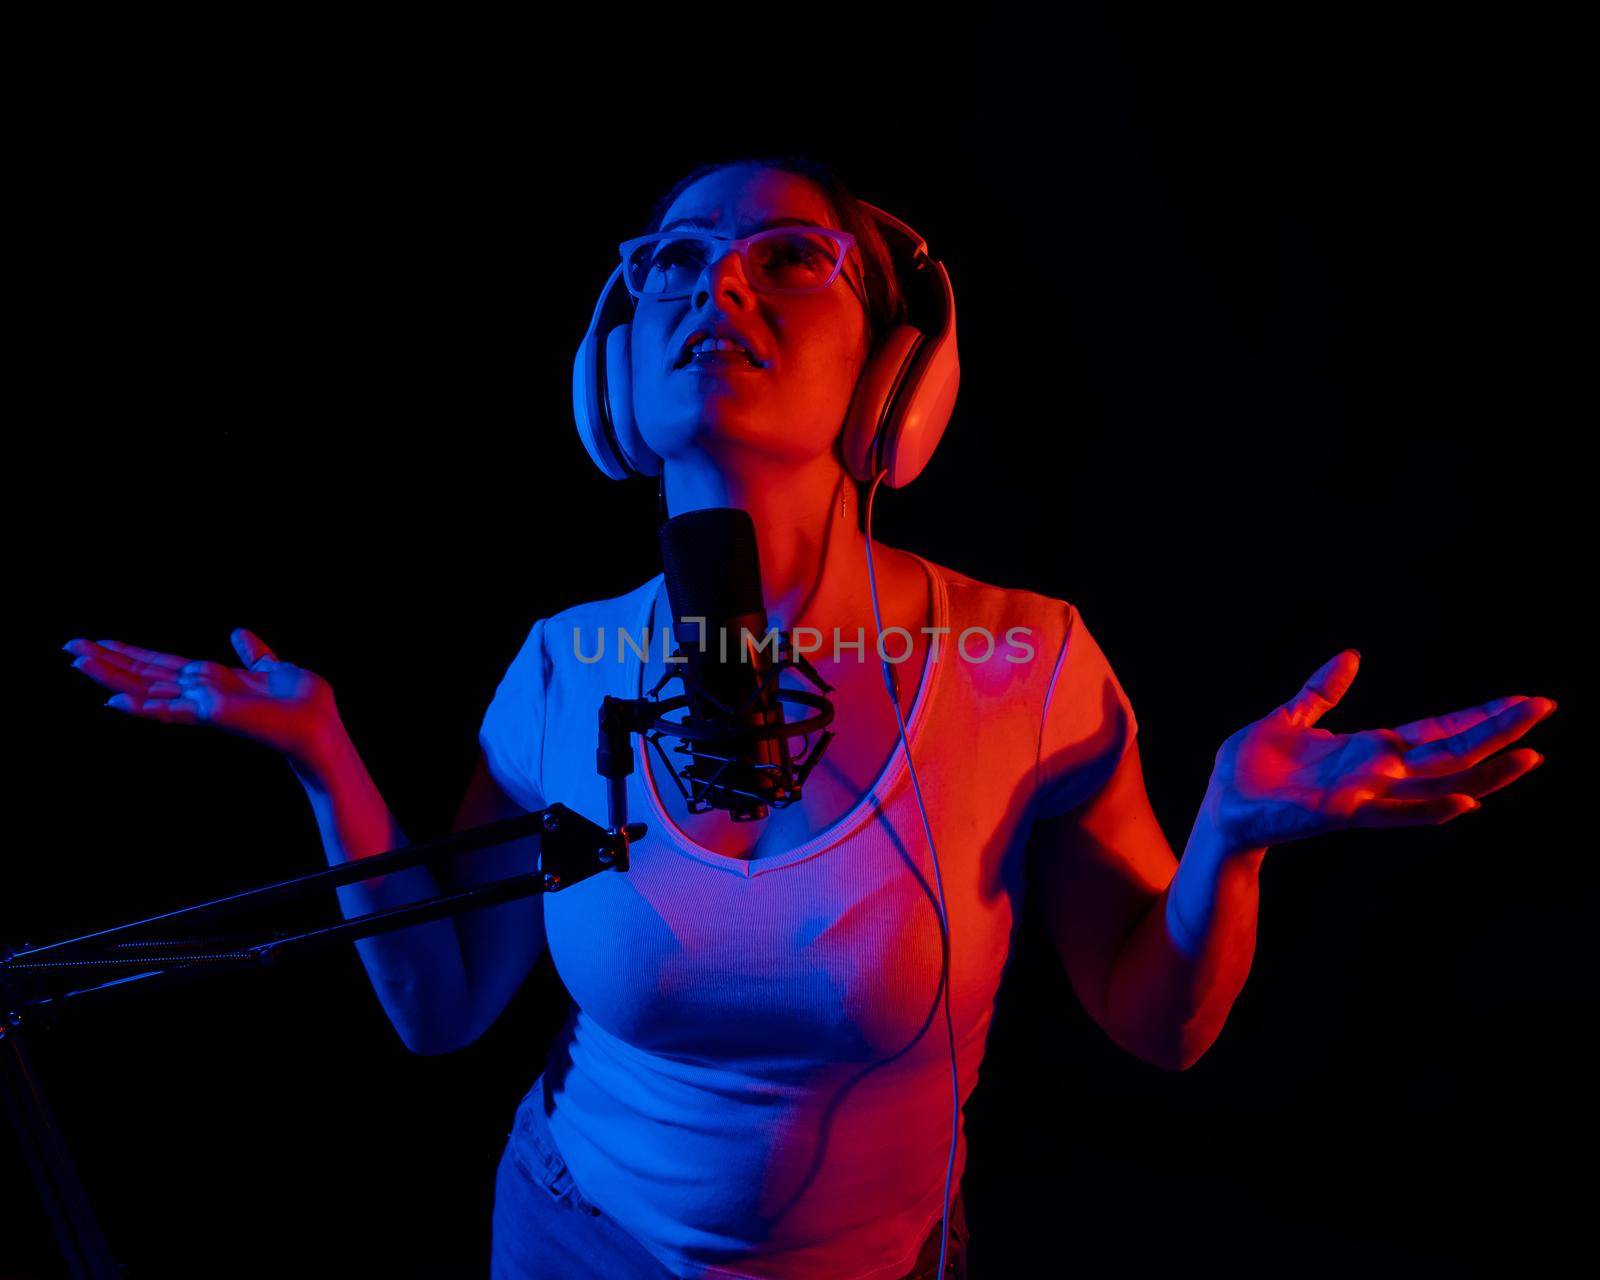 Caucasian woman in glasses and headphones sings into a microphone in neon light on a black background. An emotional girl is recording a song in a recording studio.